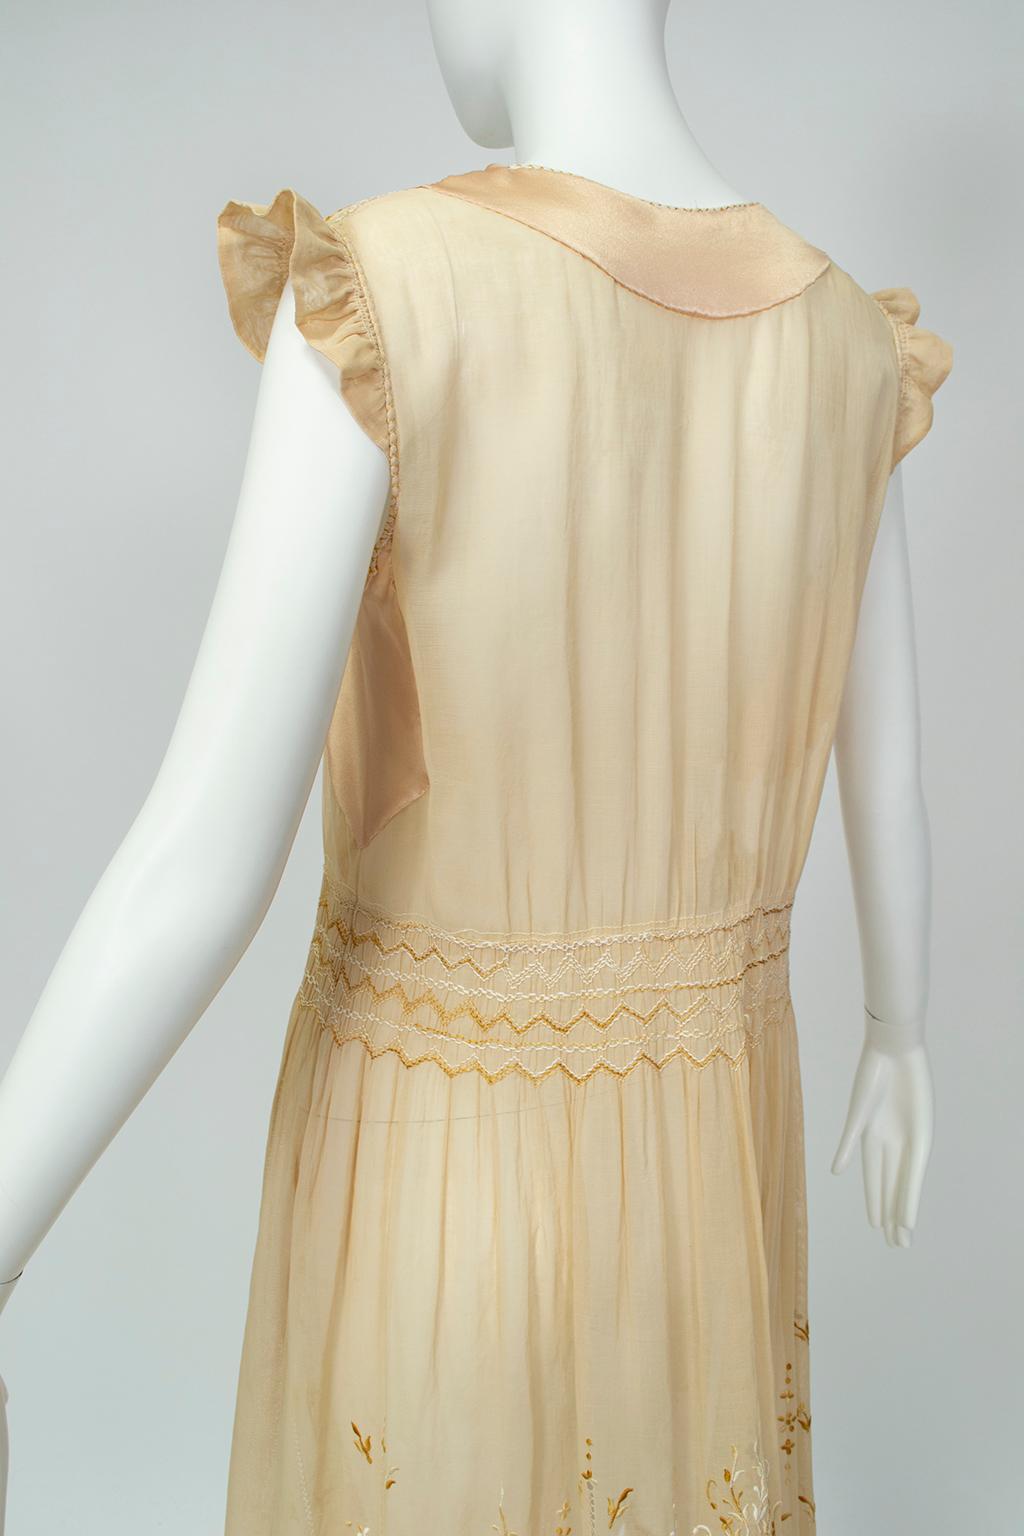 Edwardian Nude Sheer Embroidered Voile and Satin Chemise Dress - M, 1910s 1